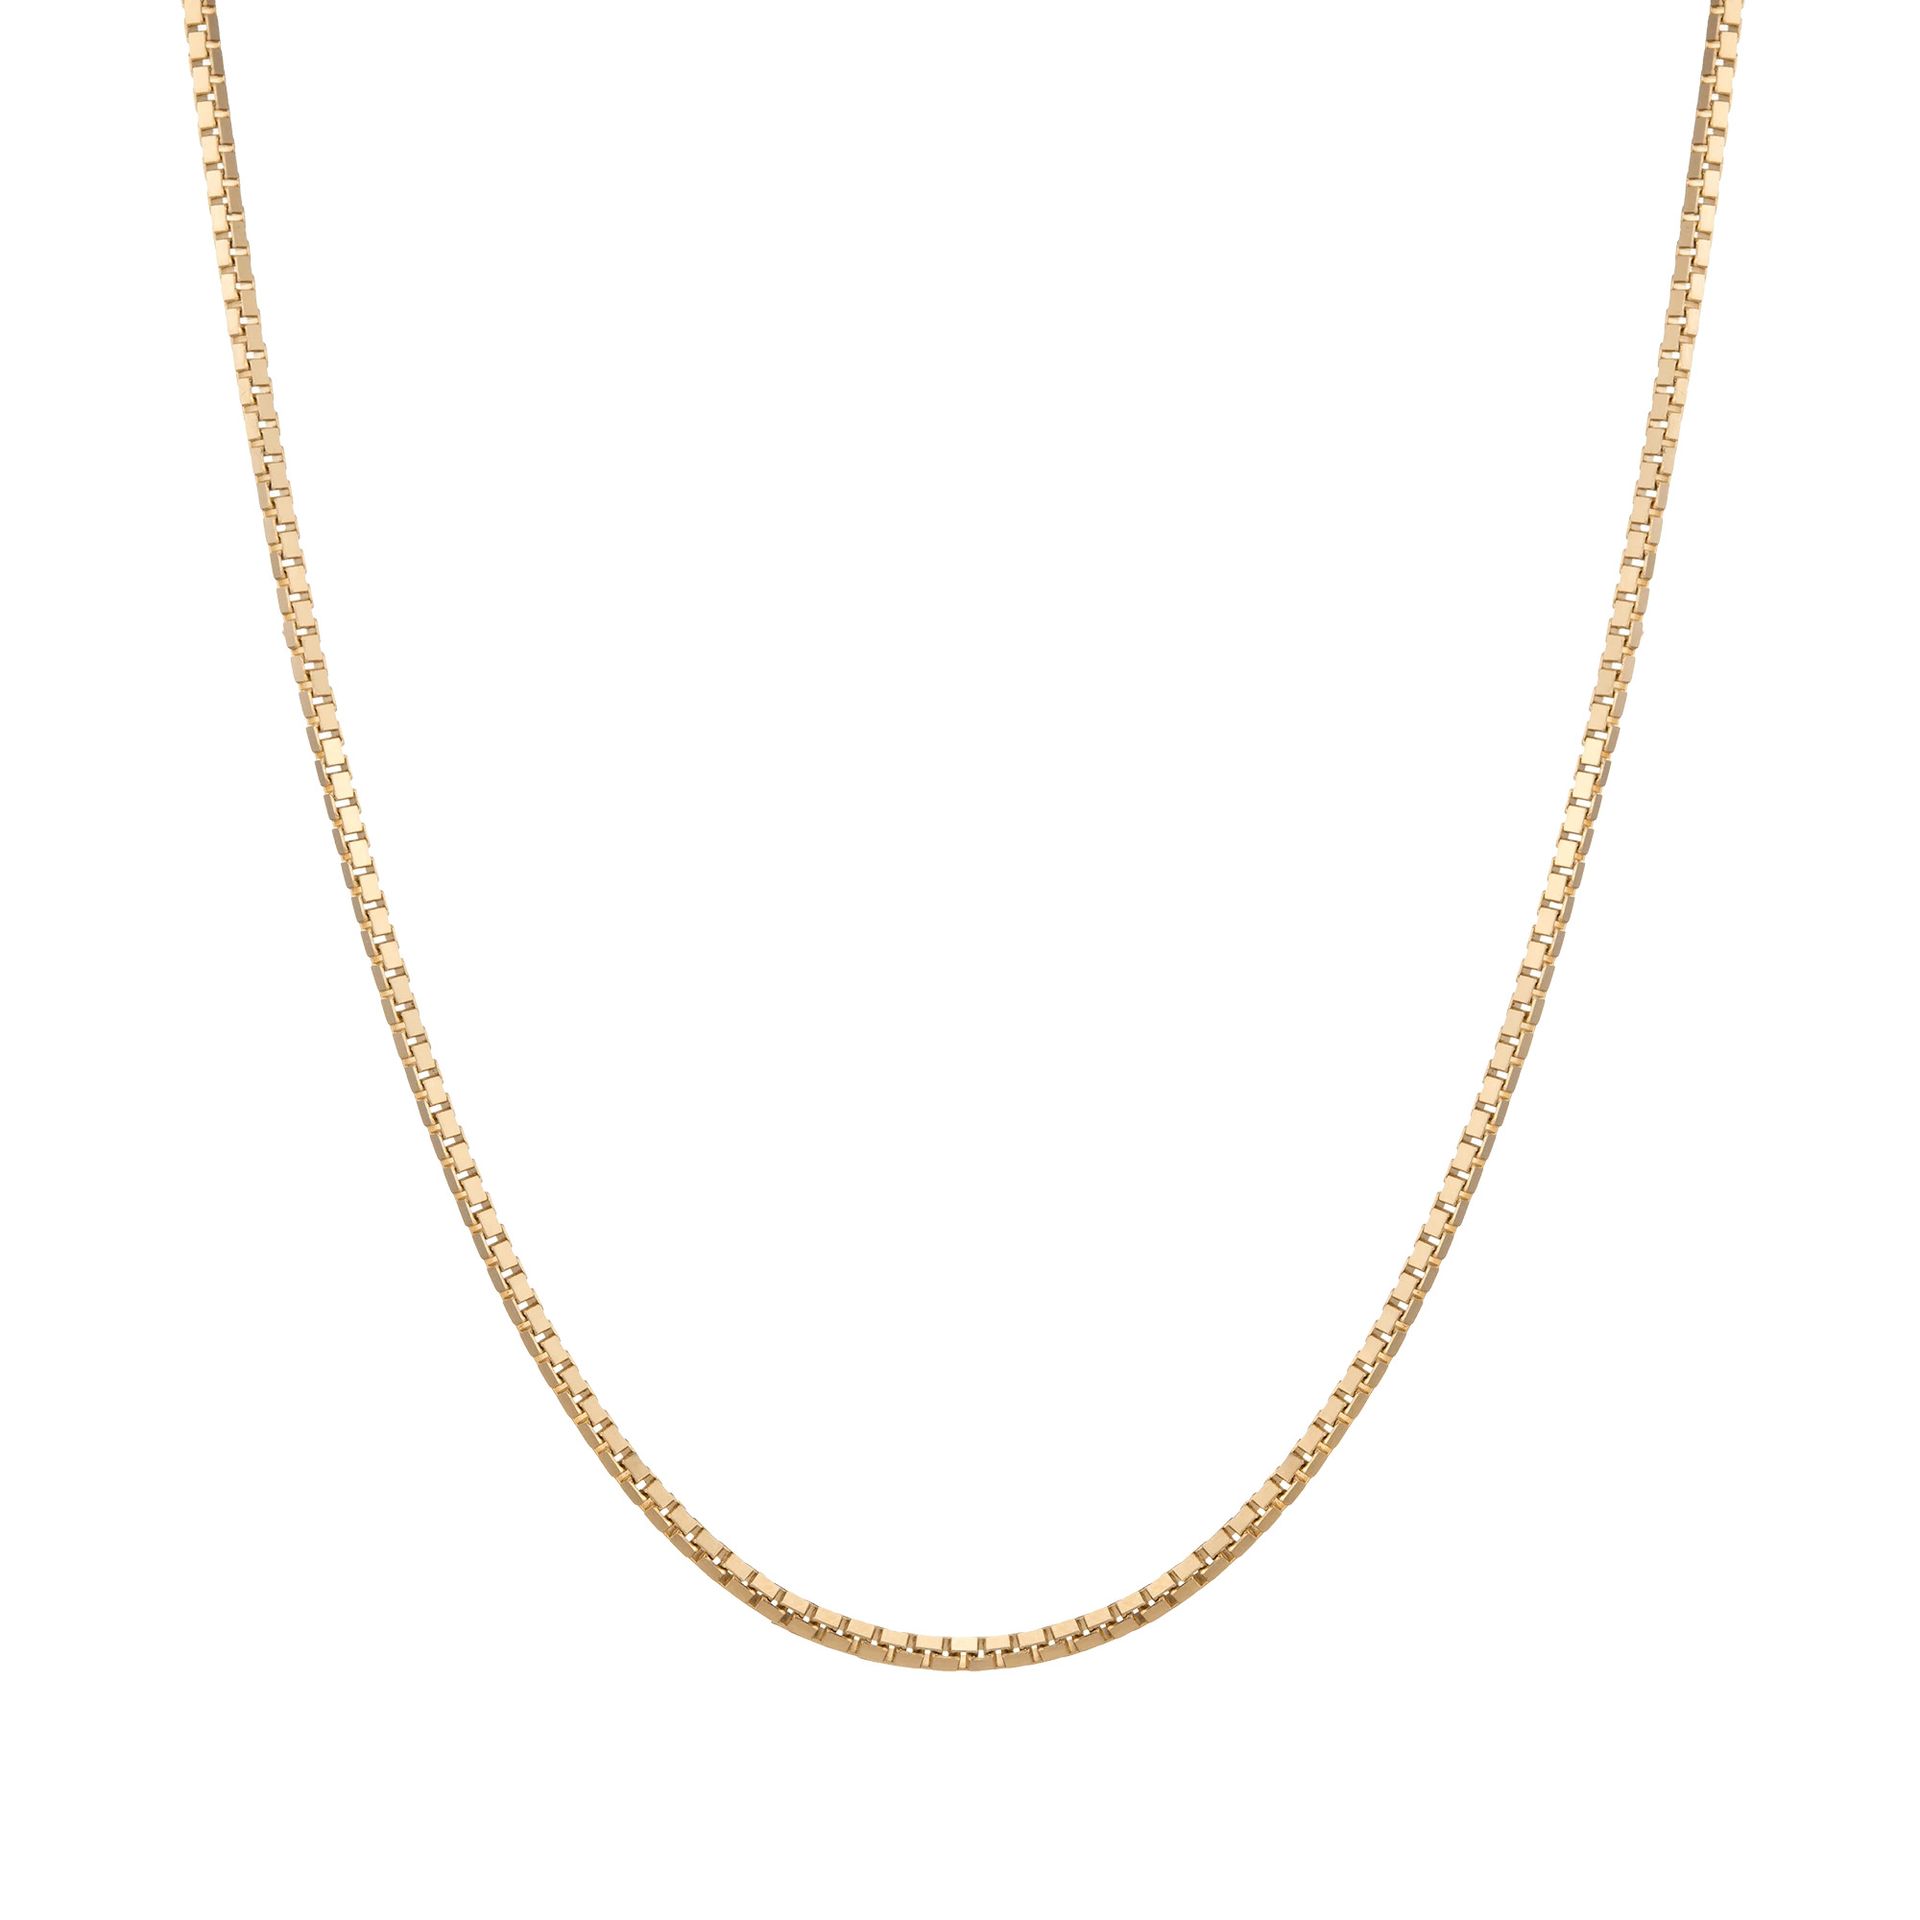 30 Simple Chain Necklaces That Are Absolutely Timeless | Who What Wear